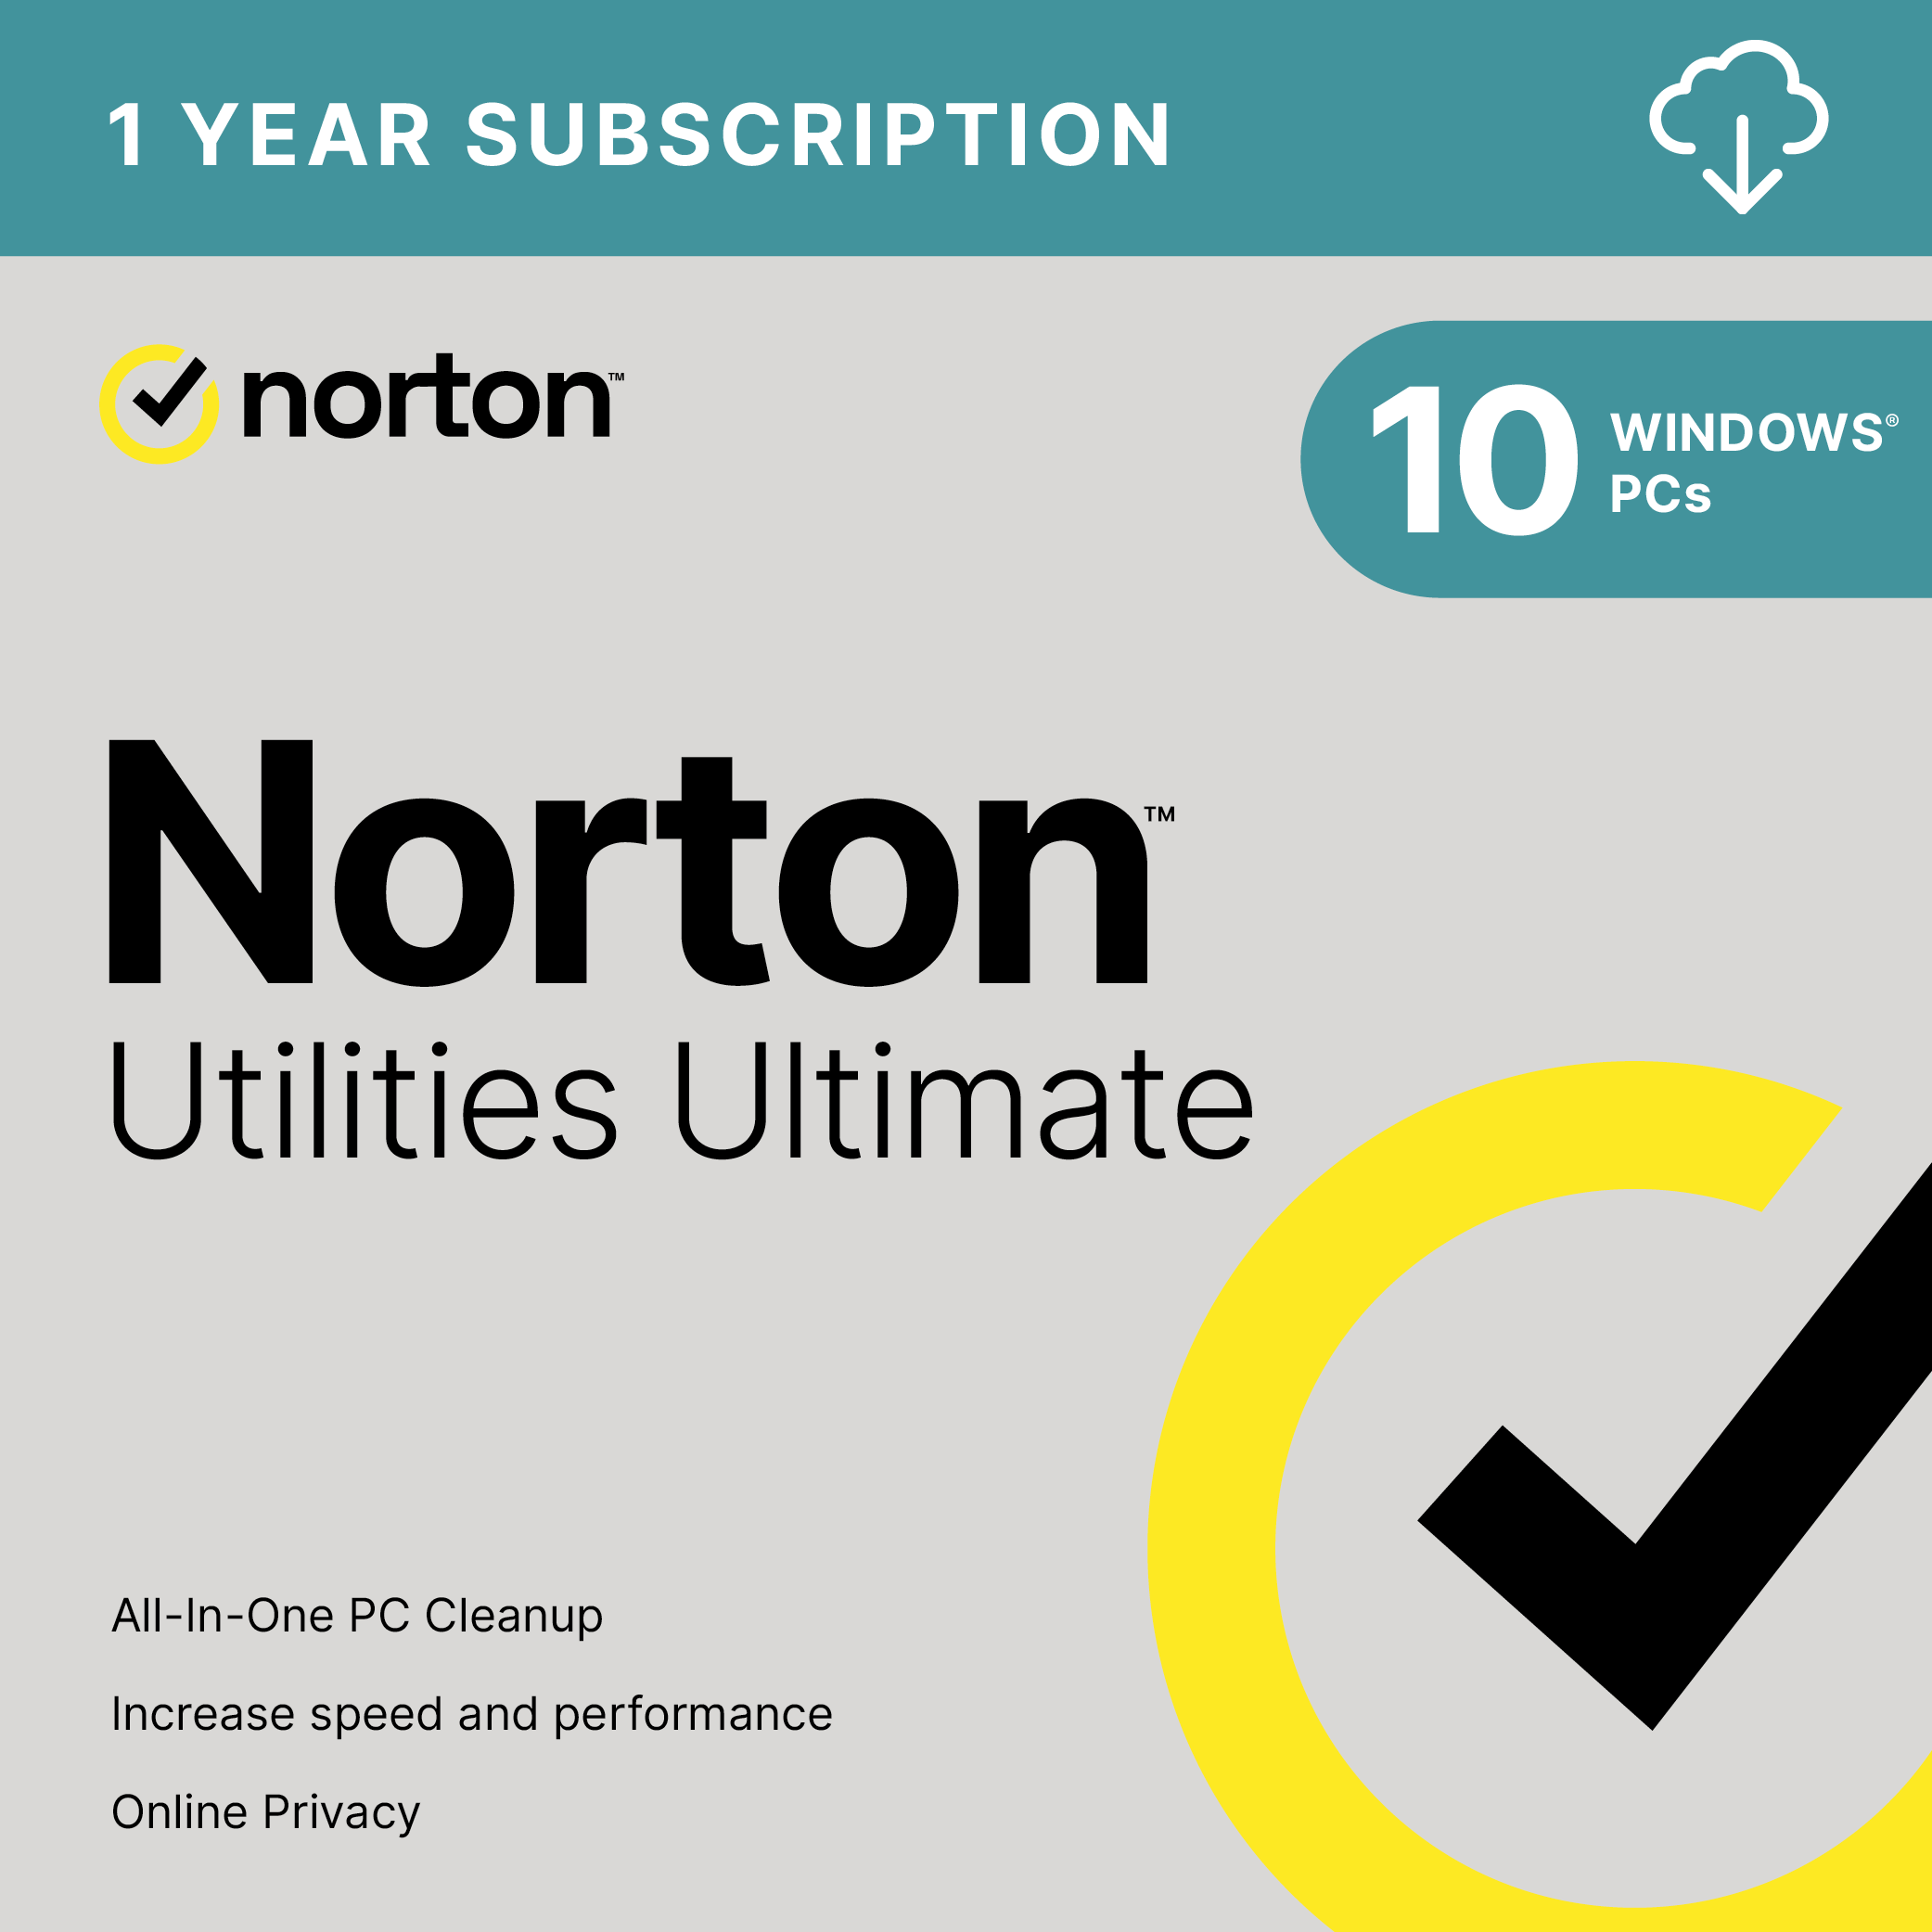 Norton Utilities Ultimate, Cleans and speeds up your PC, 1 Year Subscription, Windows PC only, for up to 10 PCs [Digital Download] - image 1 of 6